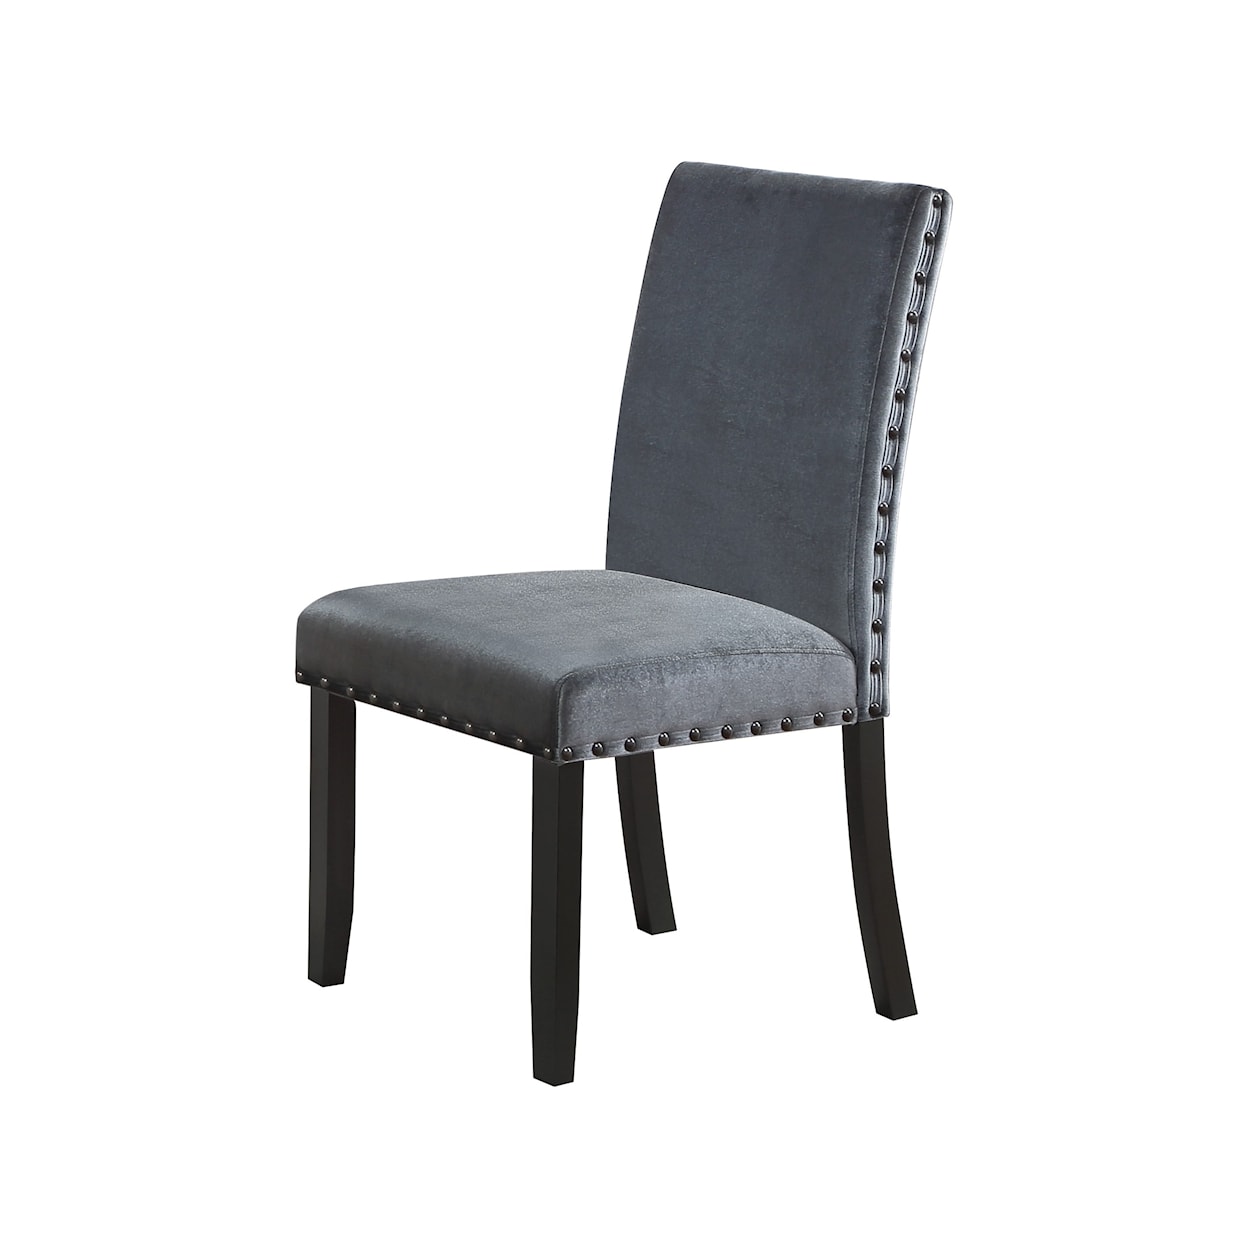 Global Furniture D1622DC Dining Chair